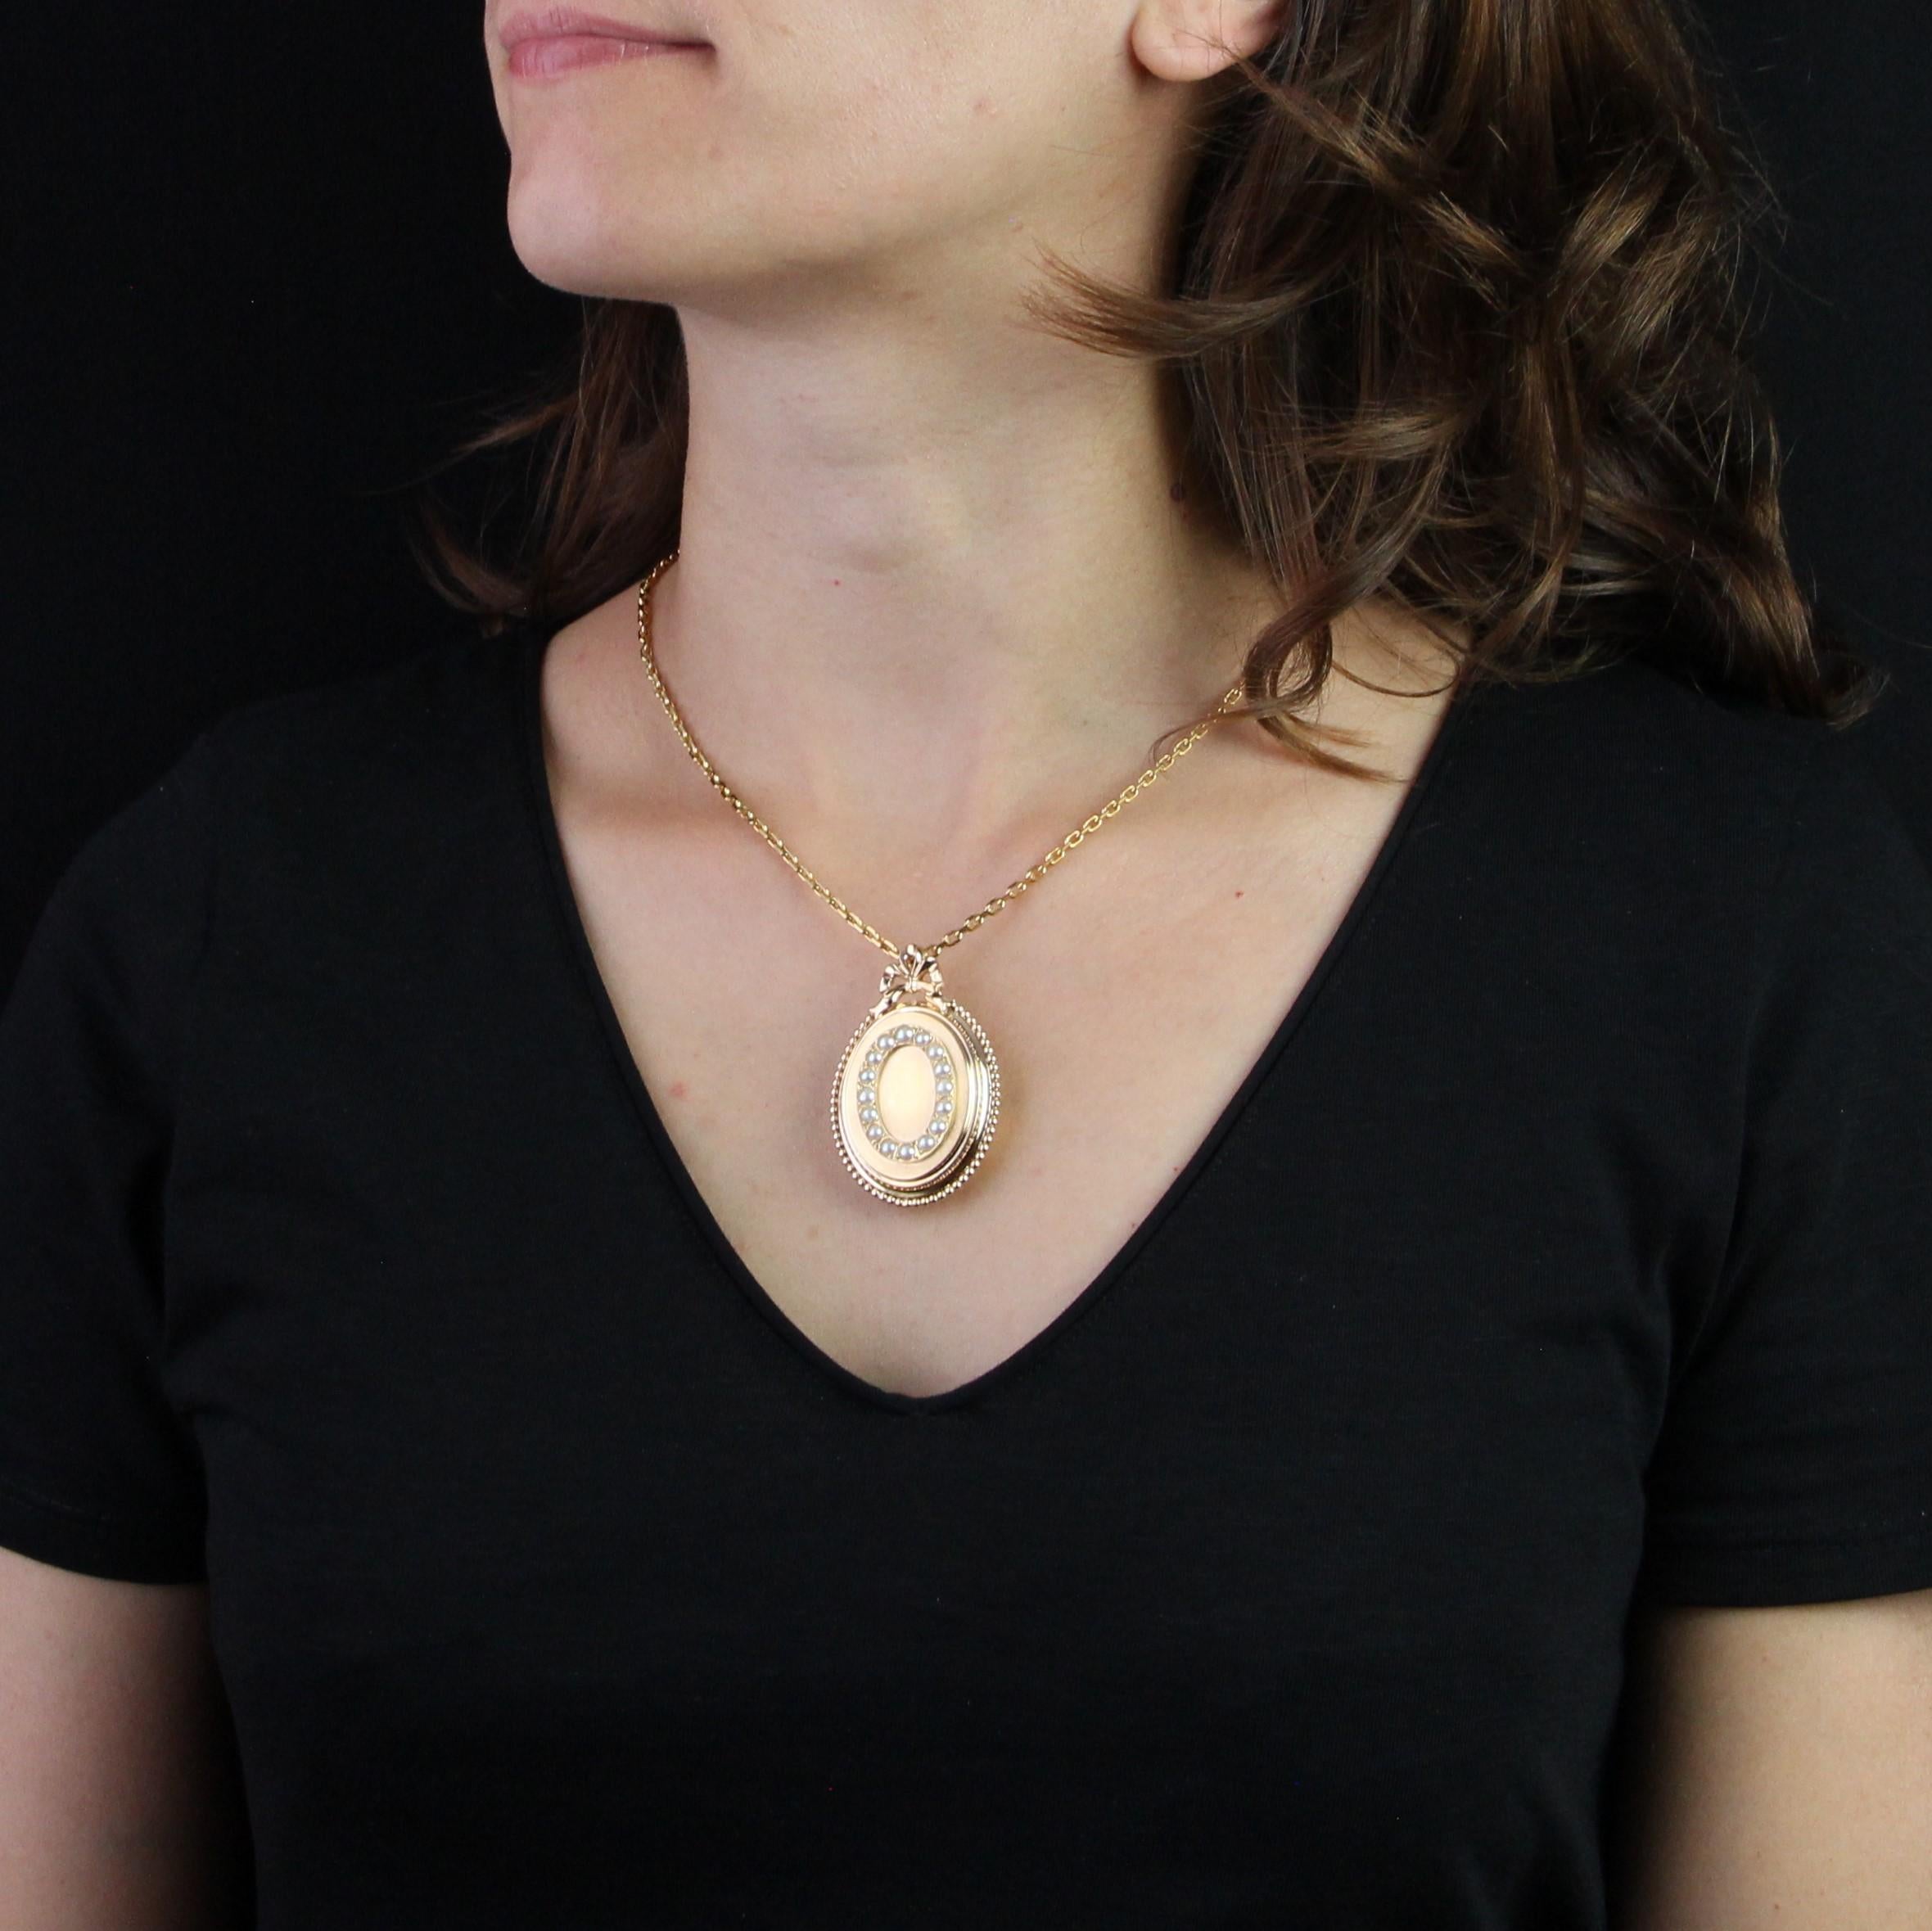 Pendant in 18 karat rose gold, eagle head hallmark.
Antique opening pendant, it is of oval shape and decorated in application on the top of half pearls. The border is decorated with a pearl and the strap hidden behind a draped knot in gold. It has 2